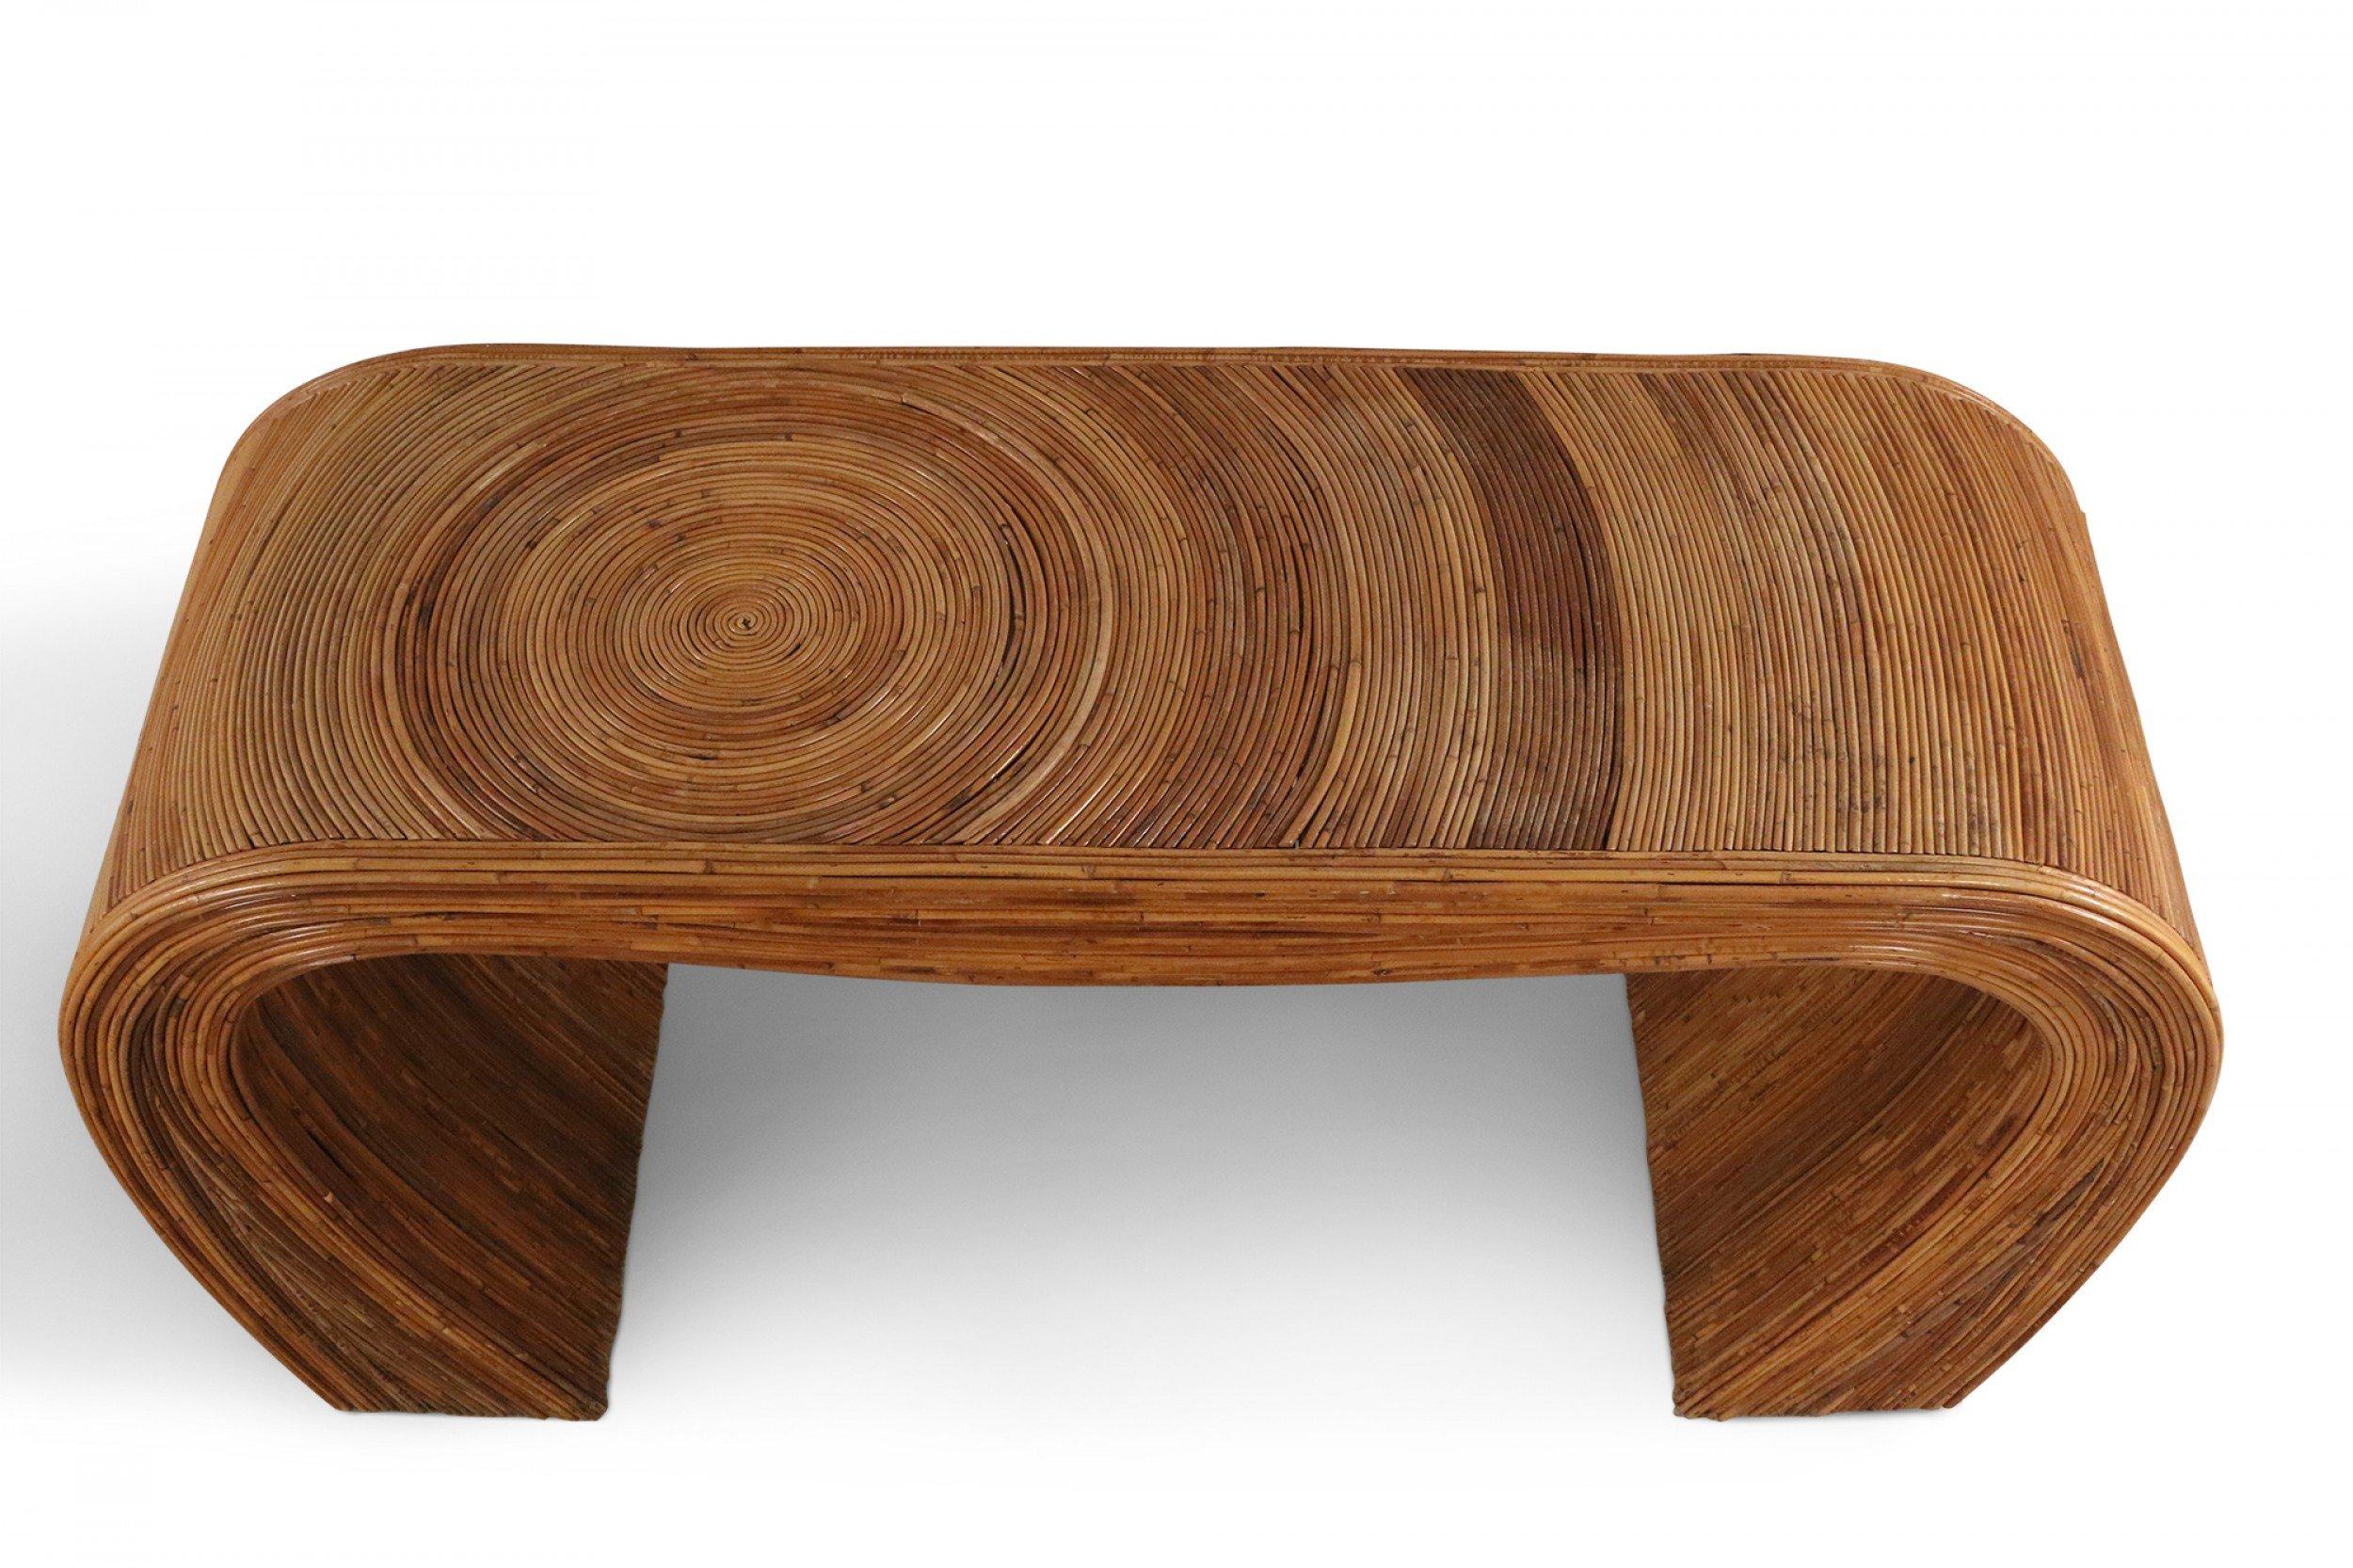 Italian midcentury console table with pencil reed veneer and organic rounded staple shape.